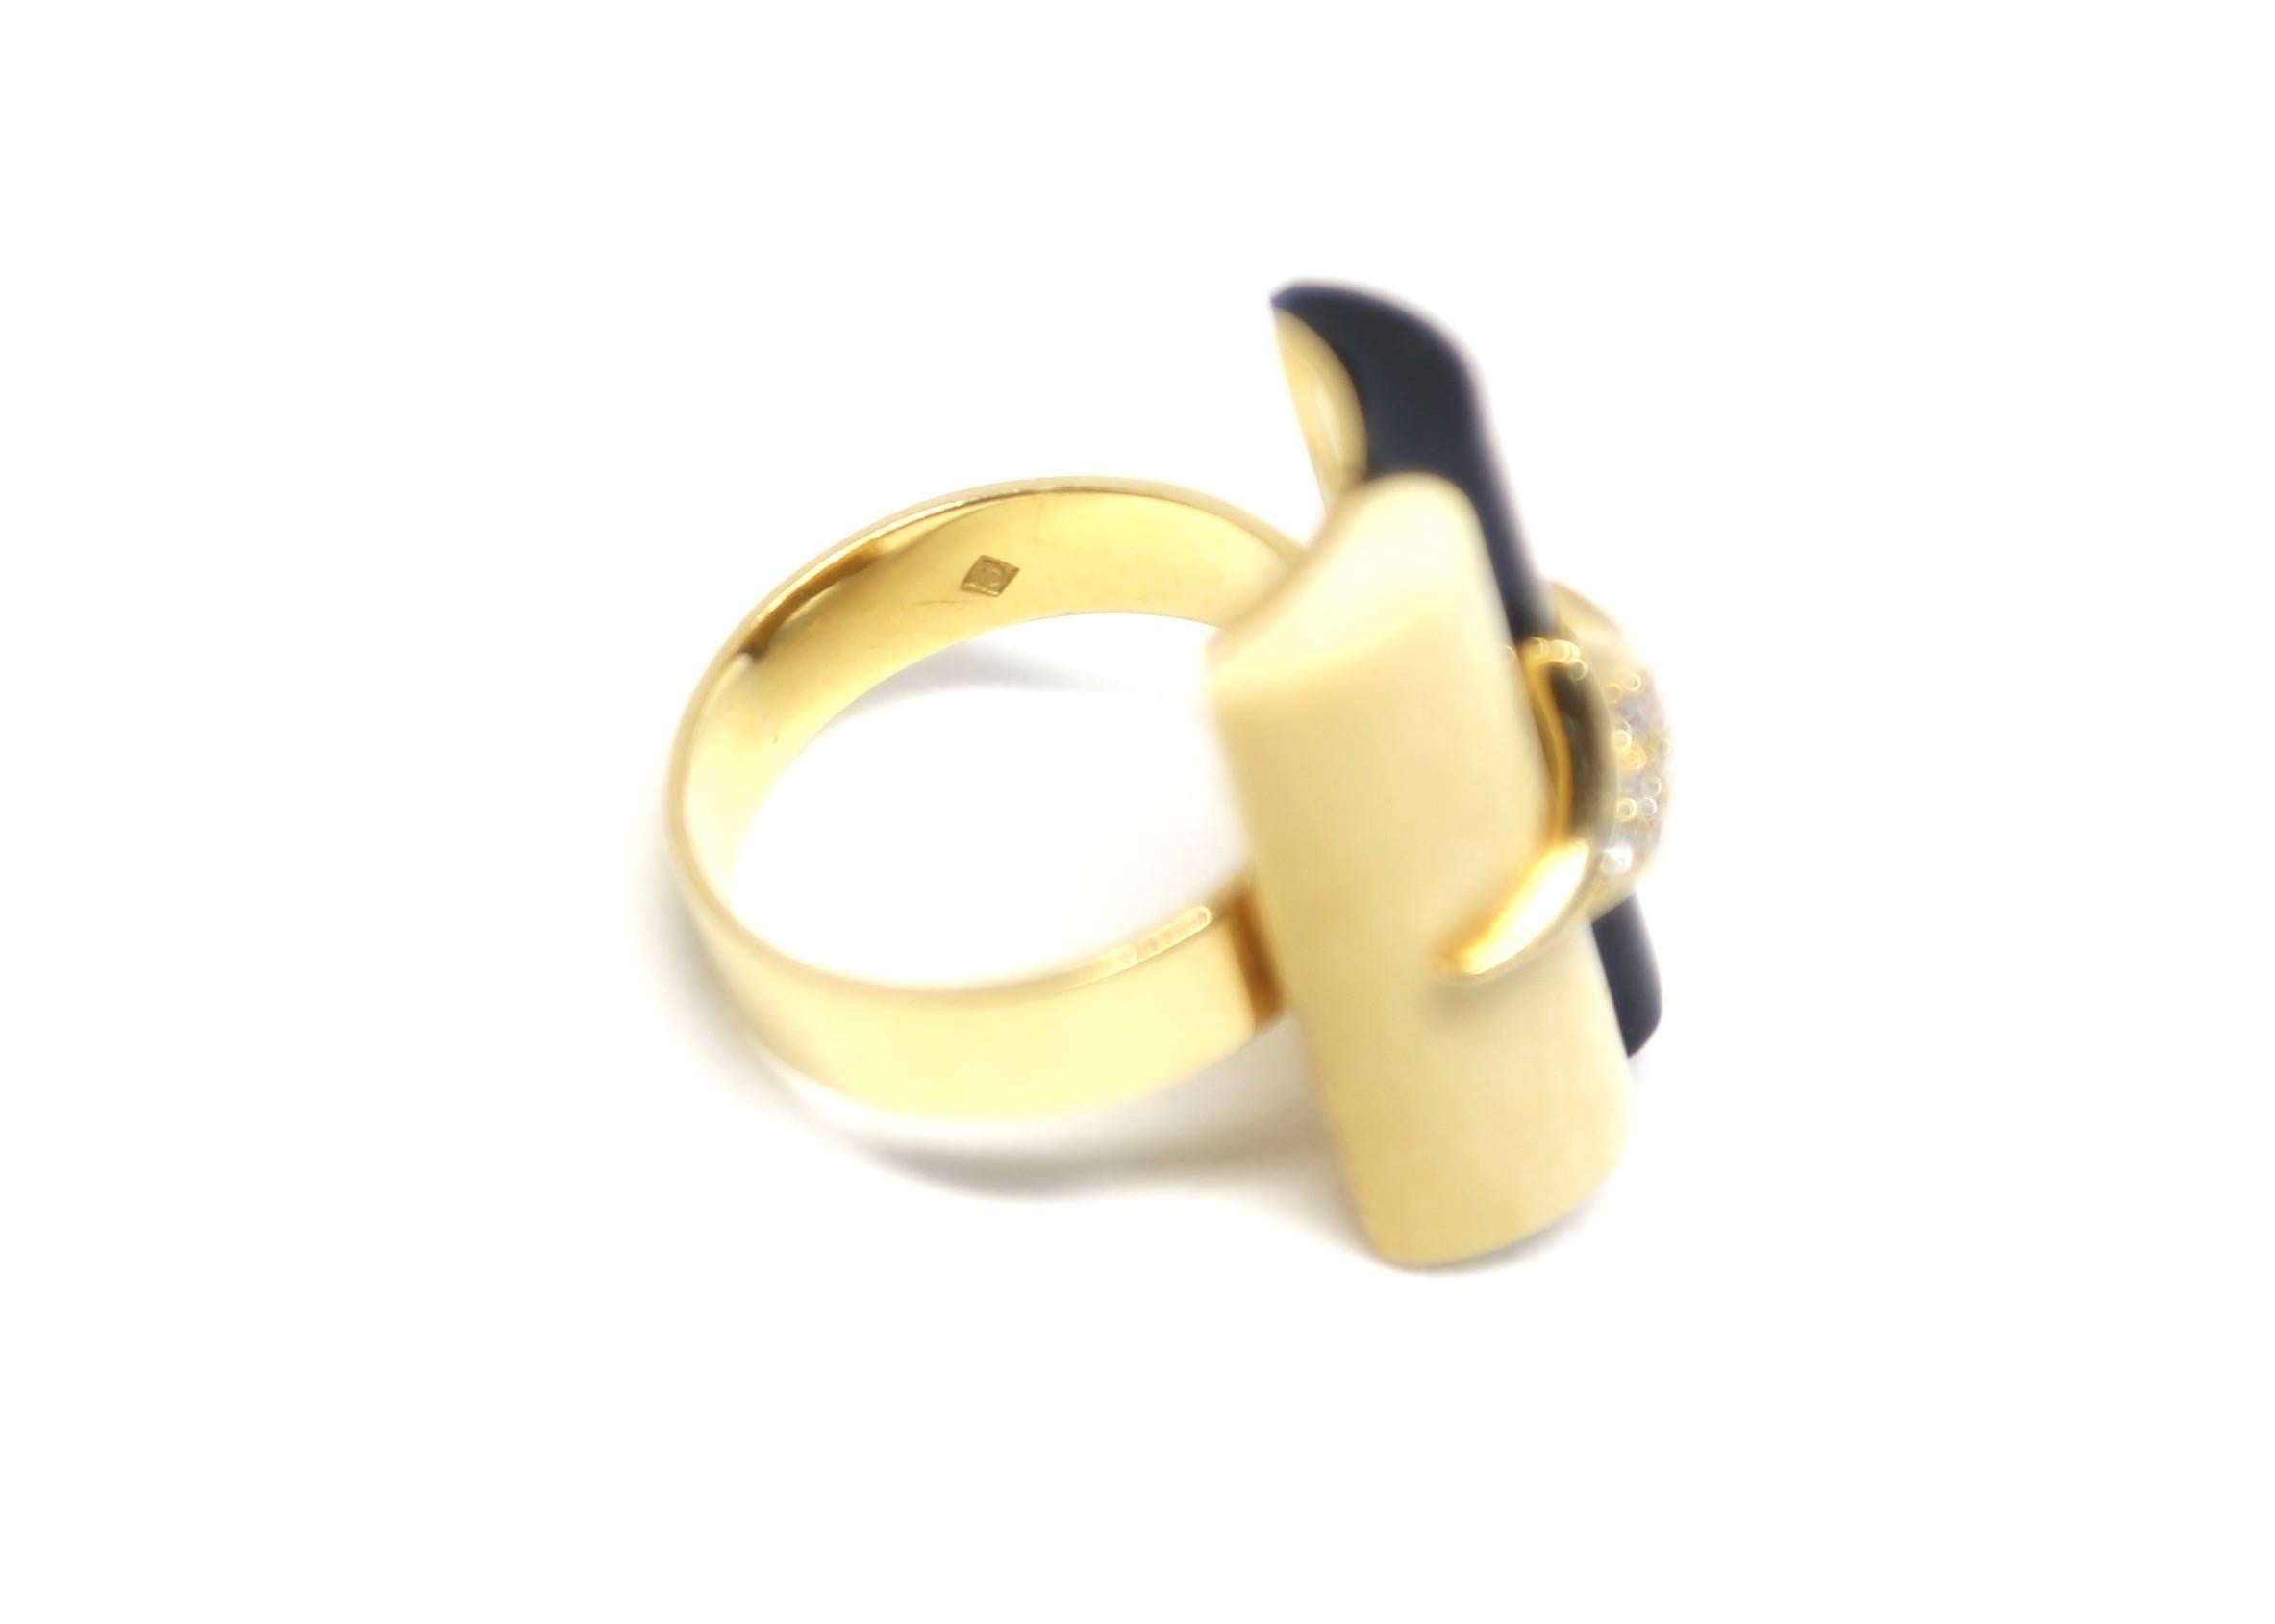 Very unusual glossy black onyx, bone ring set in 18k gold with diamond accents. Ring best fits a US size 7. Hallmarked with the H.Stern logo. Made in Brazil. Excellent condition.